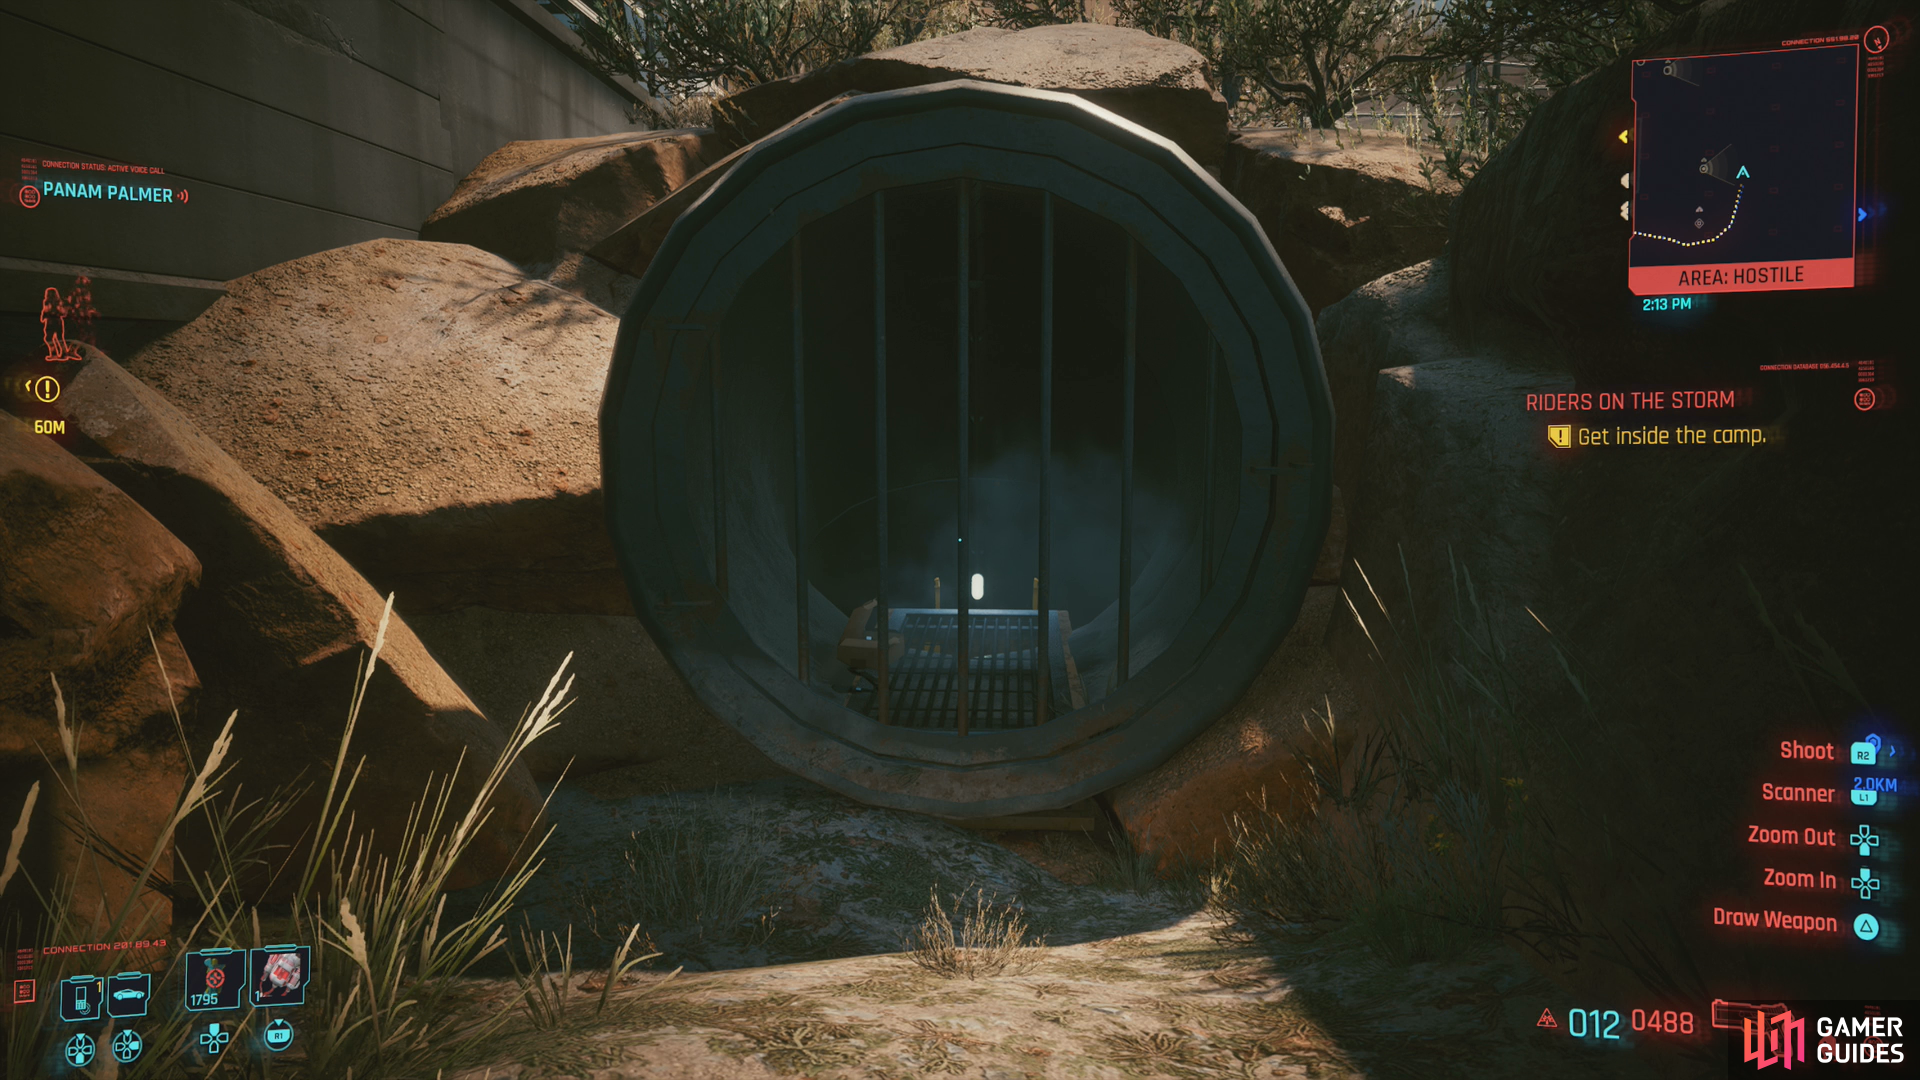 You can sneak through a drainage pipe to reach Saul.